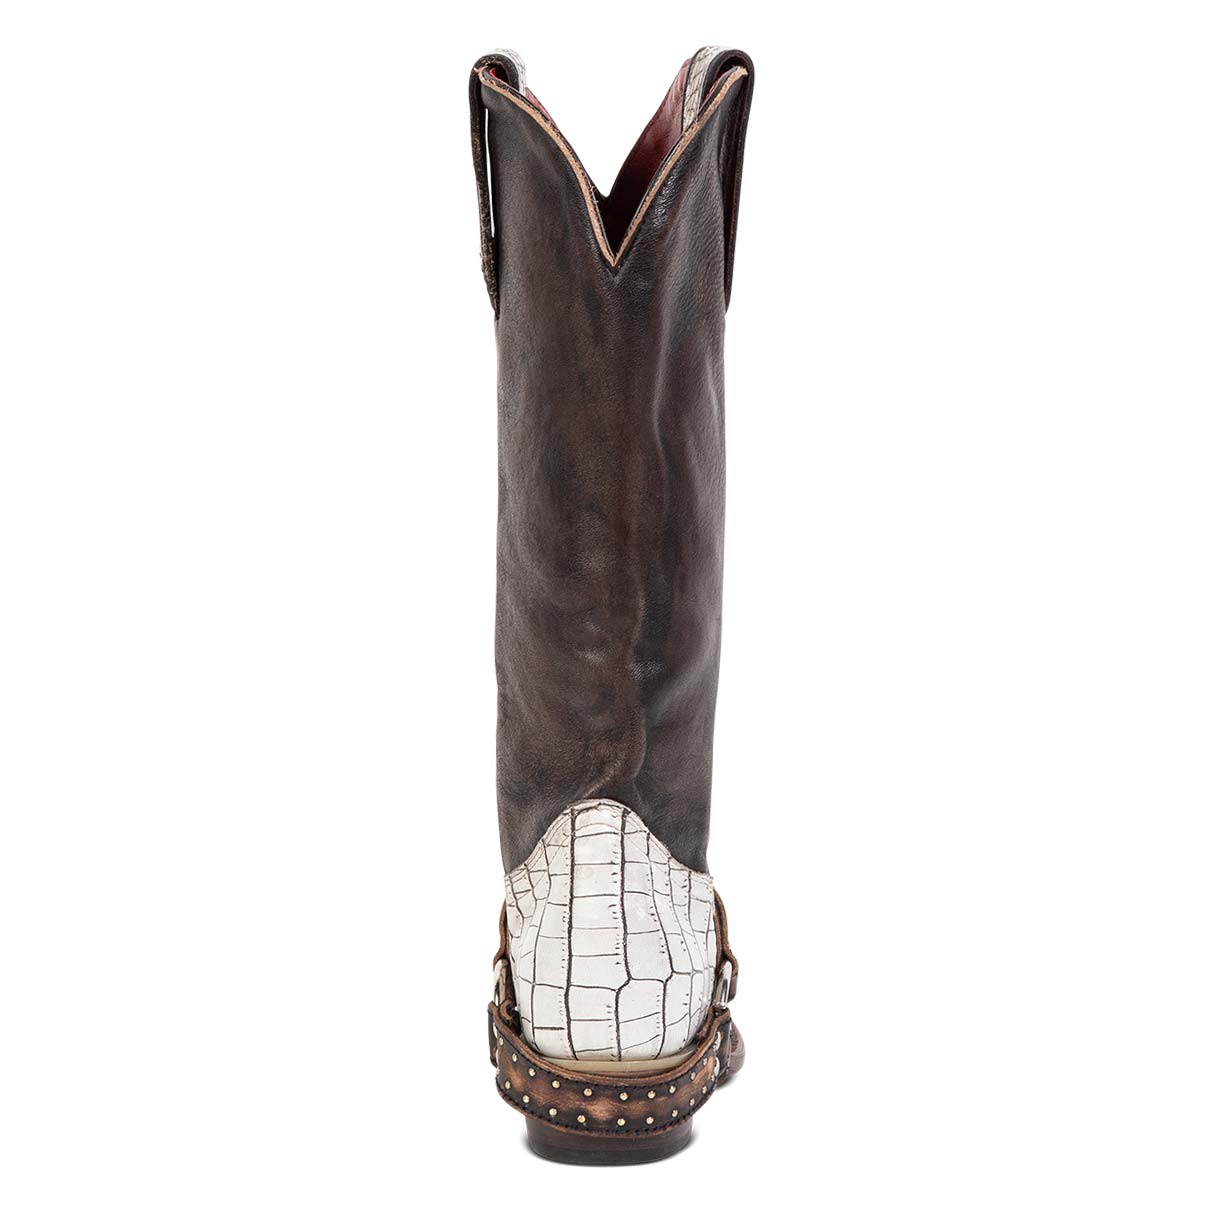 Back view showing scallop dip and embellished leather harness on FREEBIRD women's Lusitano white croco multi boot